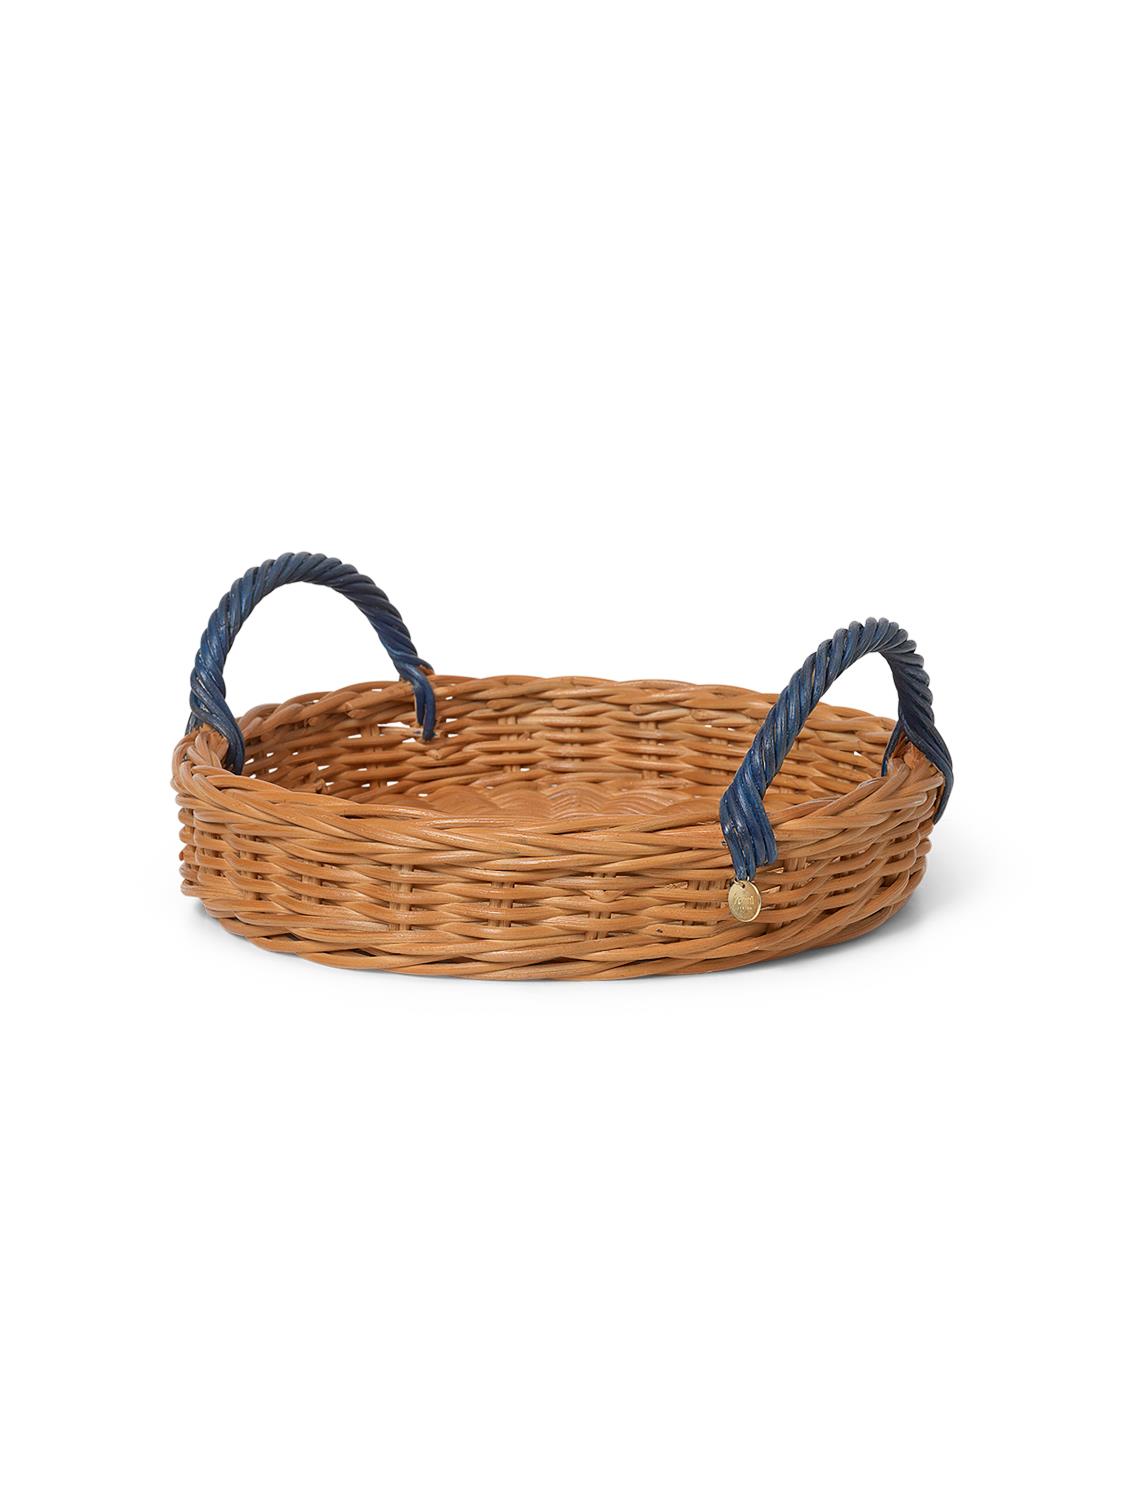 Ferm Living - Blue Handle Tray - Natural and Blue